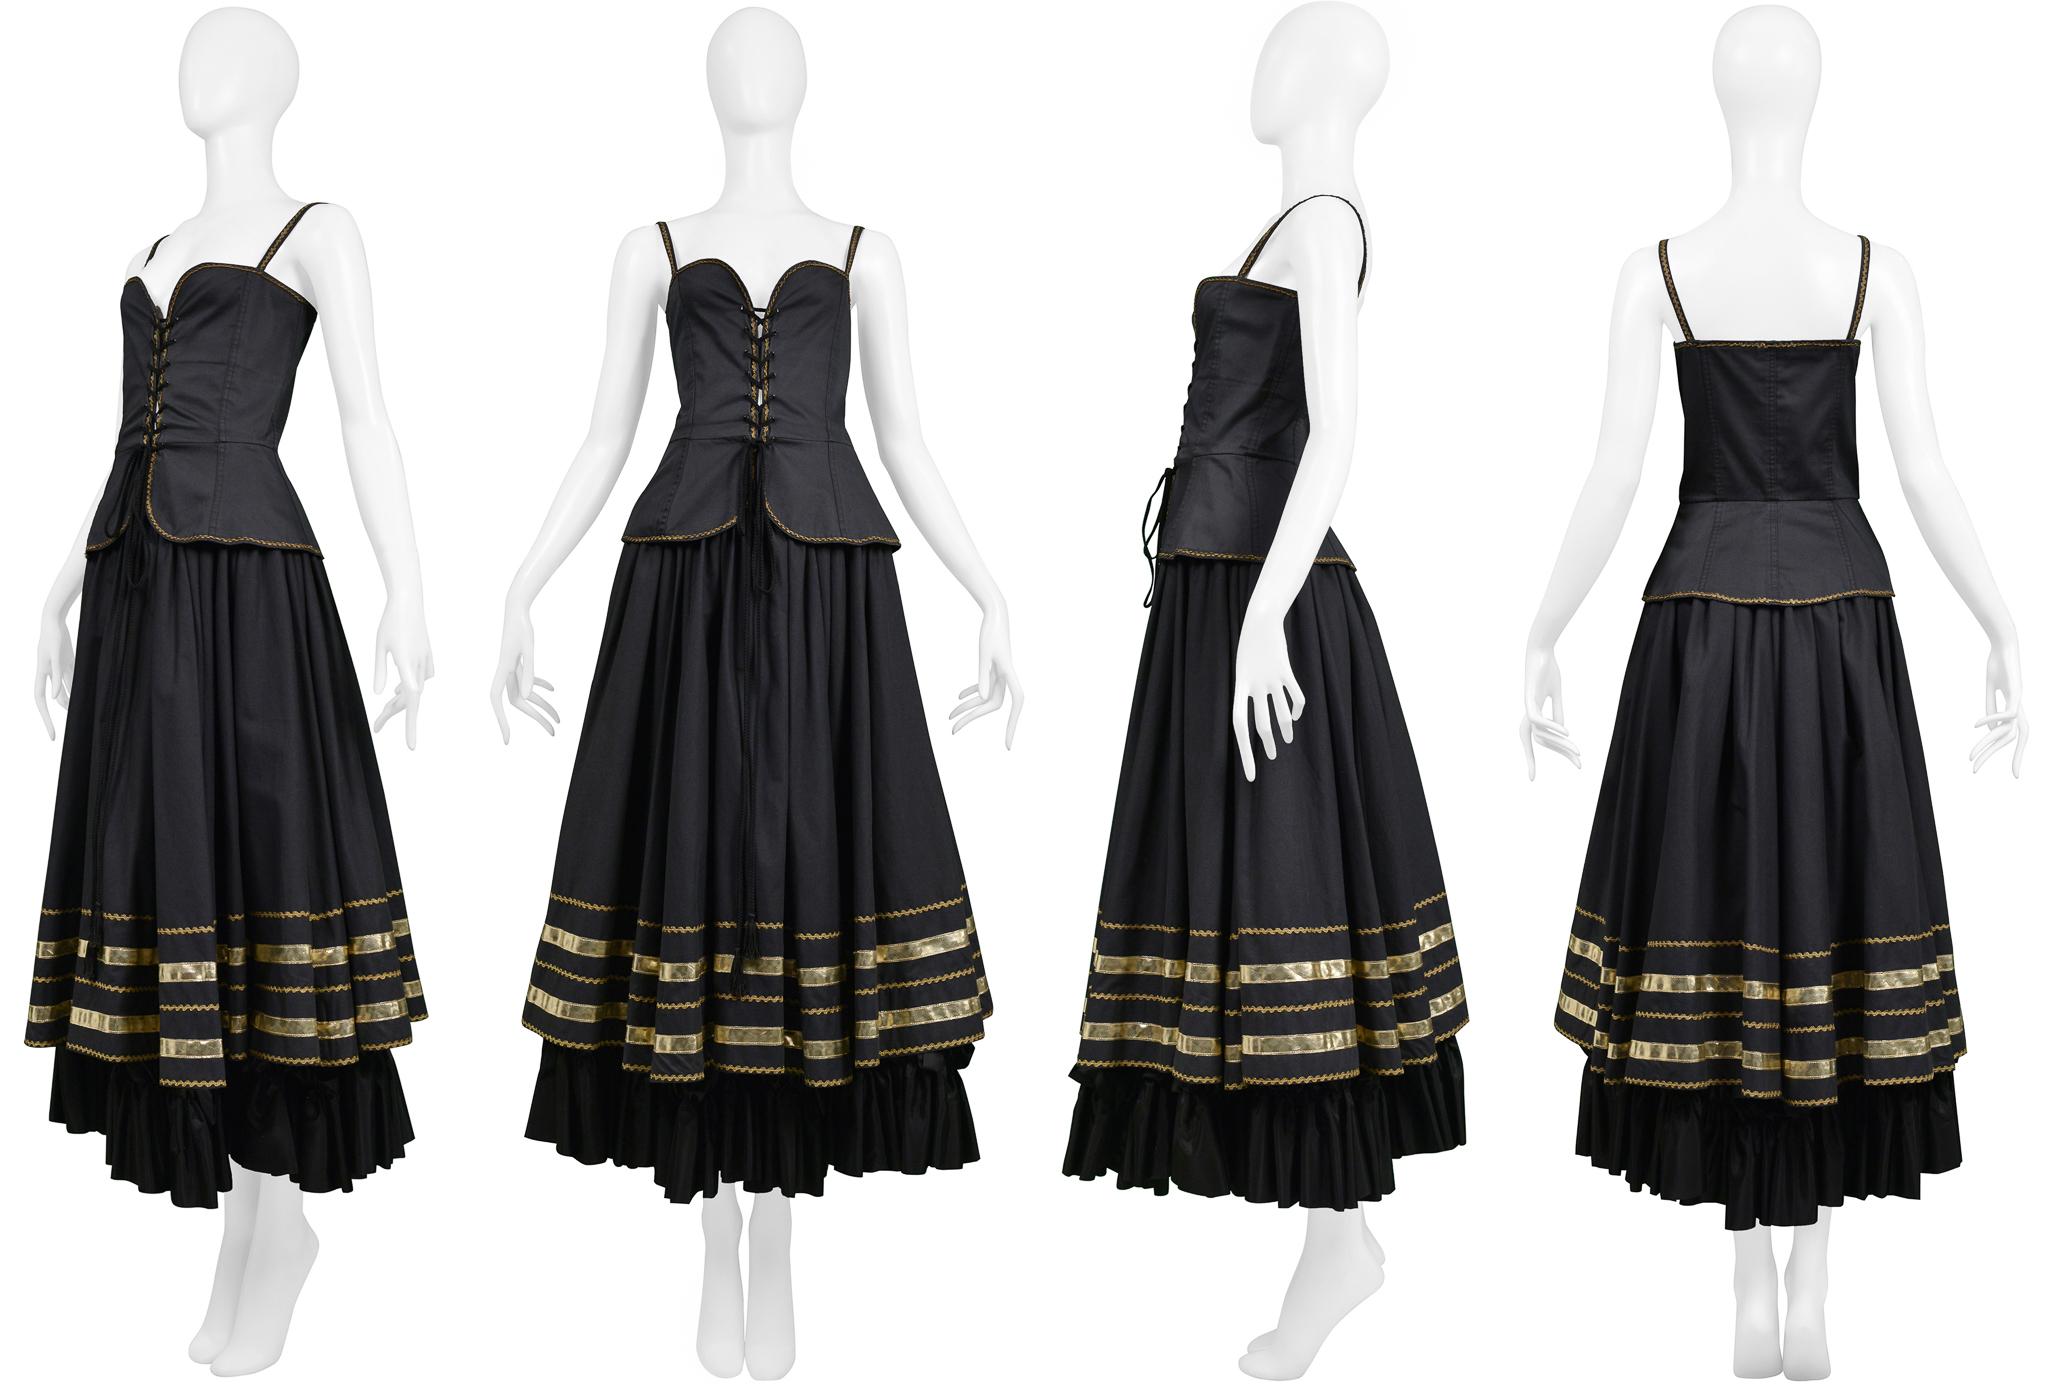 Resurrection Vintage is excited to offer a vintage Yves Saint Laurent black and gold corset top and fancy peasant skirt ensemble, The corset features laces up the front, fitted body and gold trim. The skirt features a full body, gold trim and